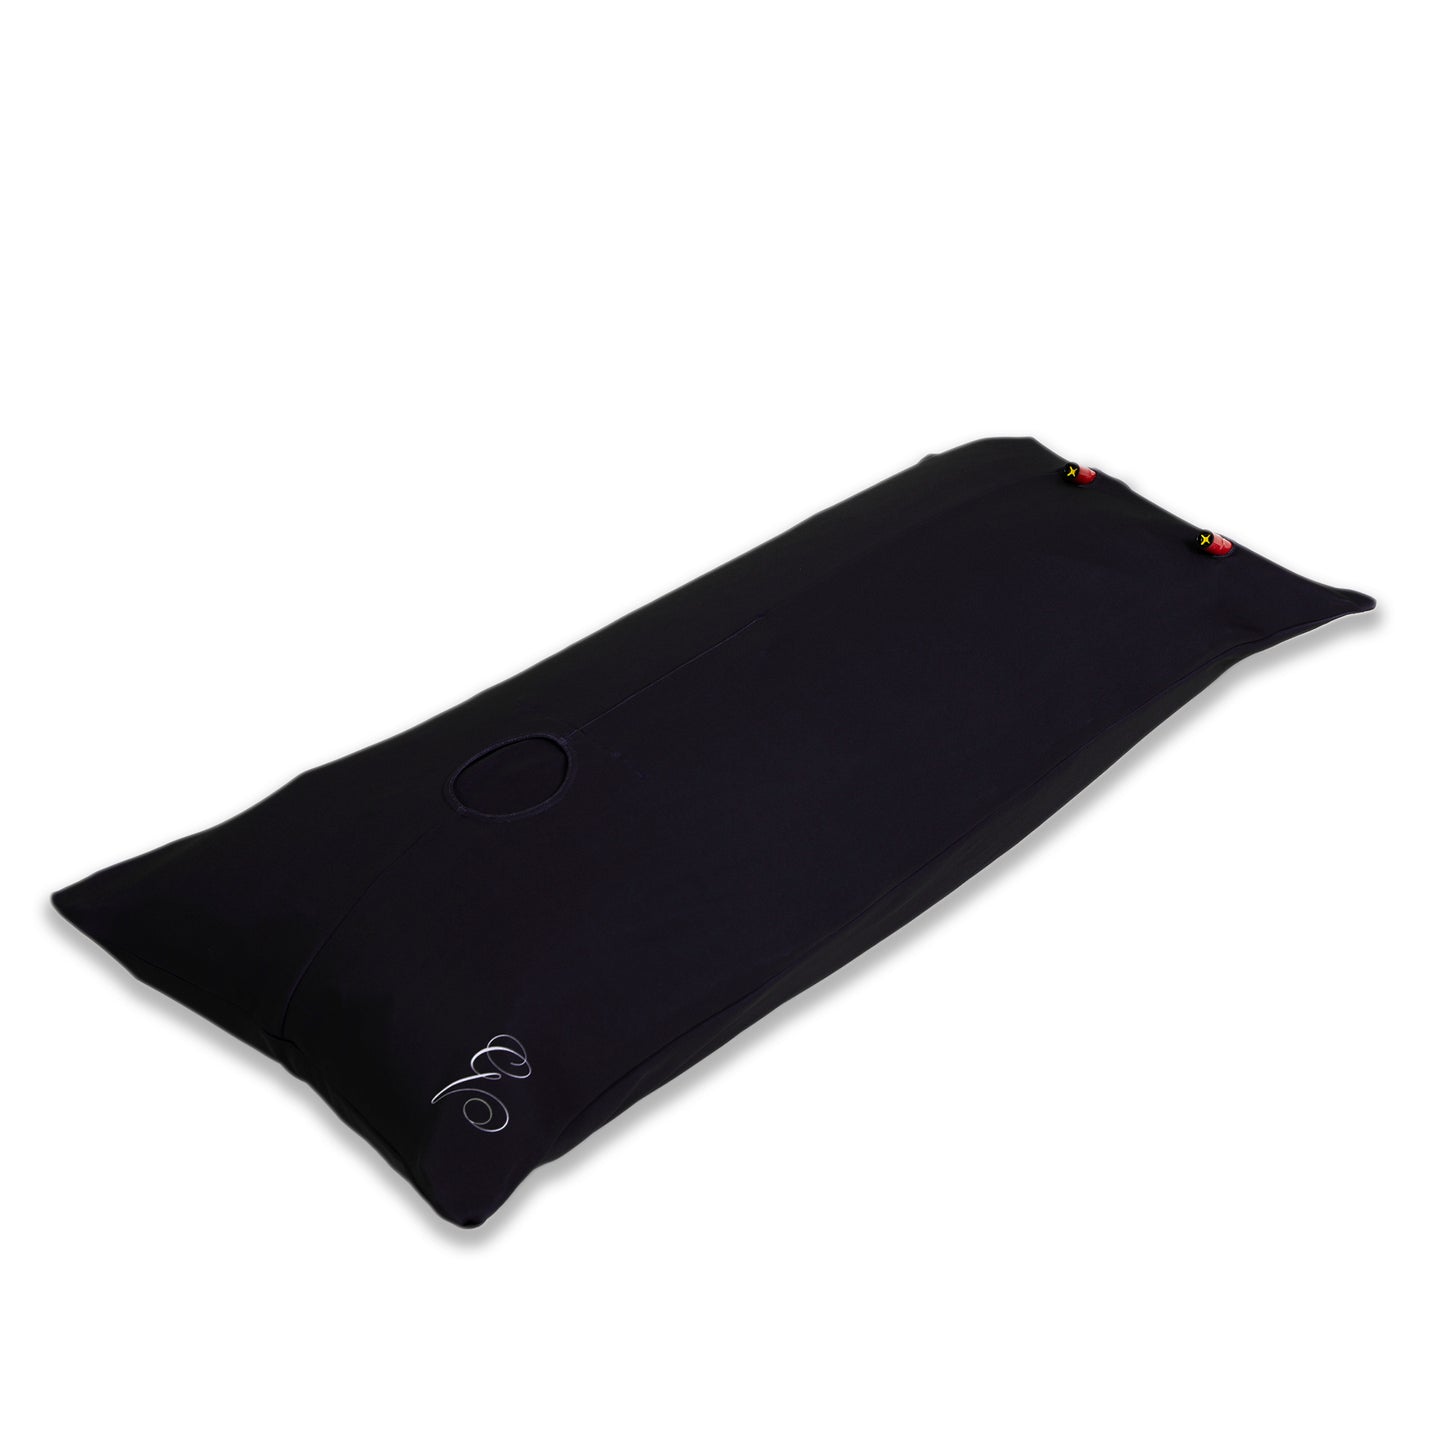 The Bolero pillow from Pillowsforeplay encased in the Black Slip. Just add your toy and away you go. 